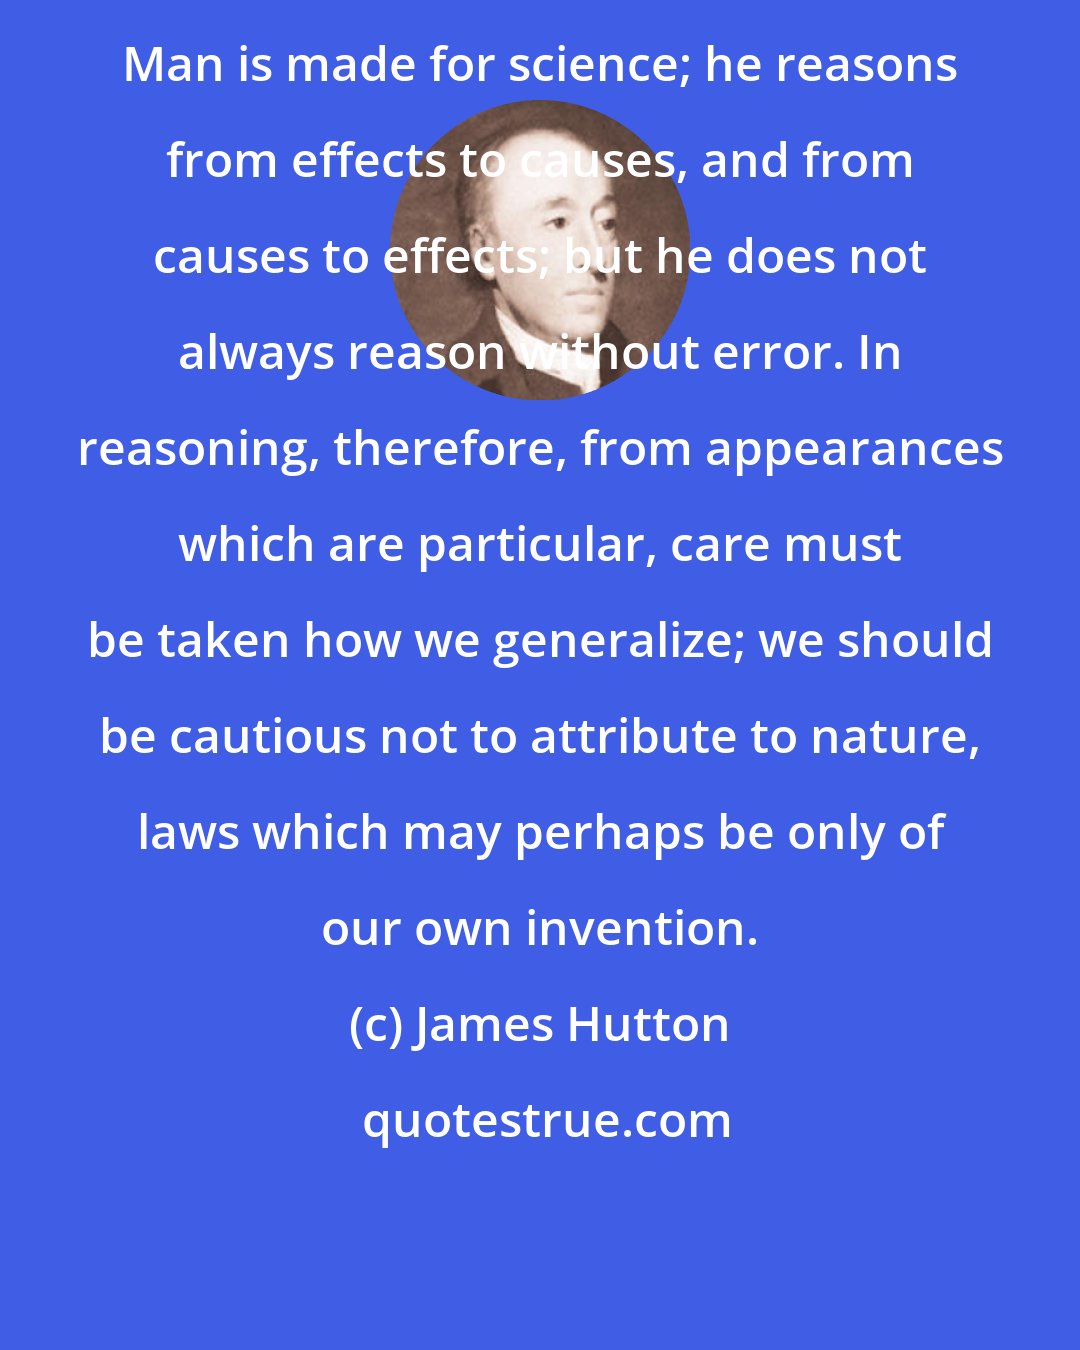 James Hutton: Man is made for science; he reasons from effects to causes, and from causes to effects; but he does not always reason without error. In reasoning, therefore, from appearances which are particular, care must be taken how we generalize; we should be cautious not to attribute to nature, laws which may perhaps be only of our own invention.